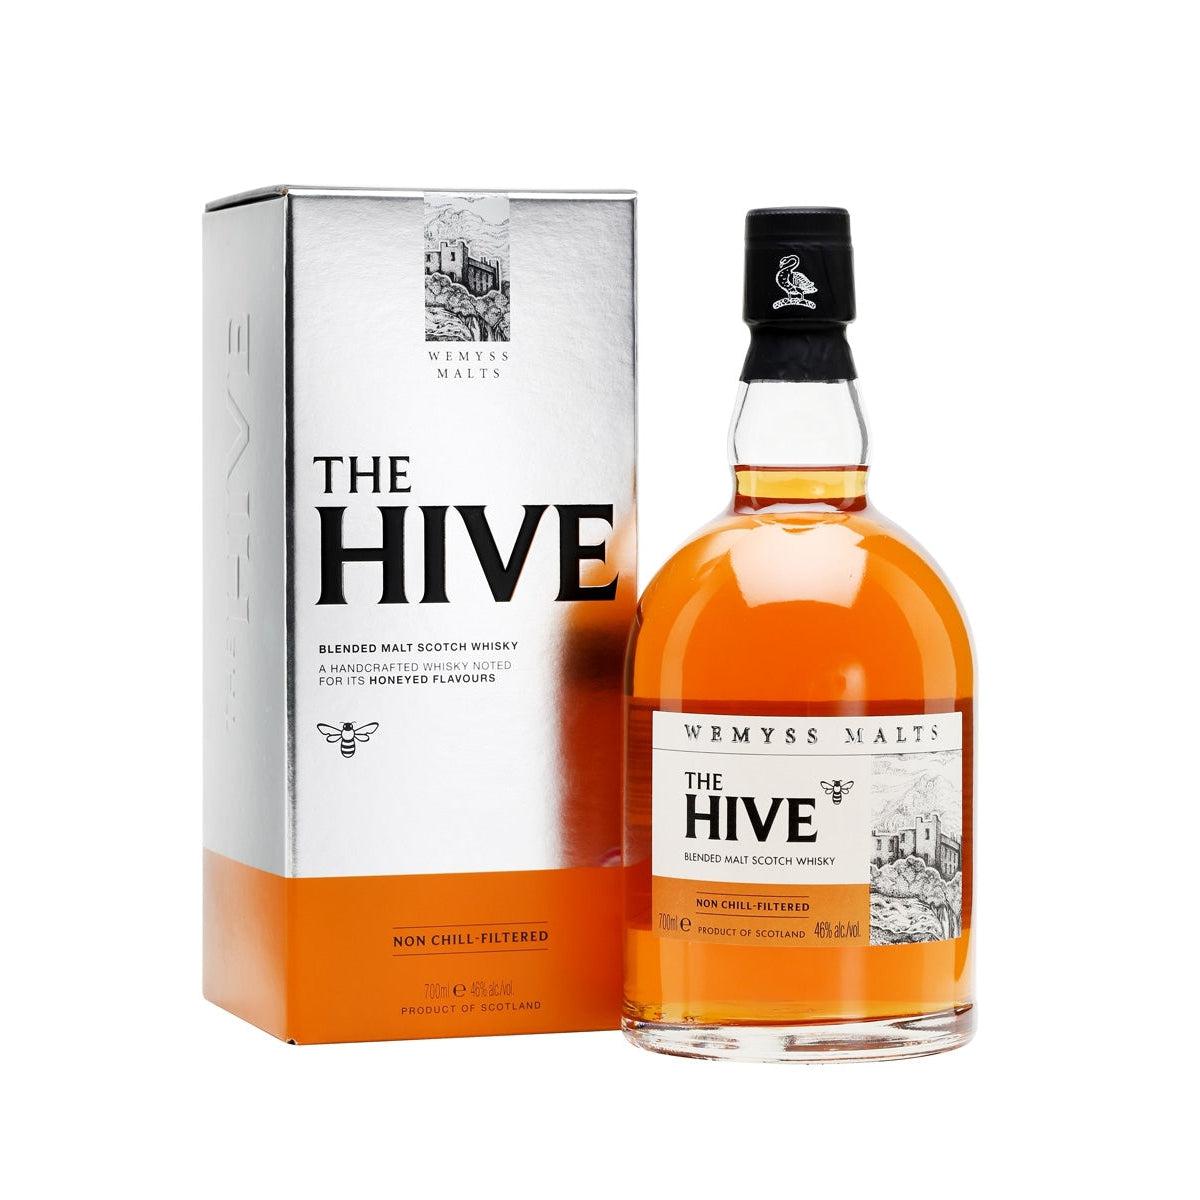 Wemyss Malts The Hive Blended Malt Scotch Whisky Non Chill - Filtered